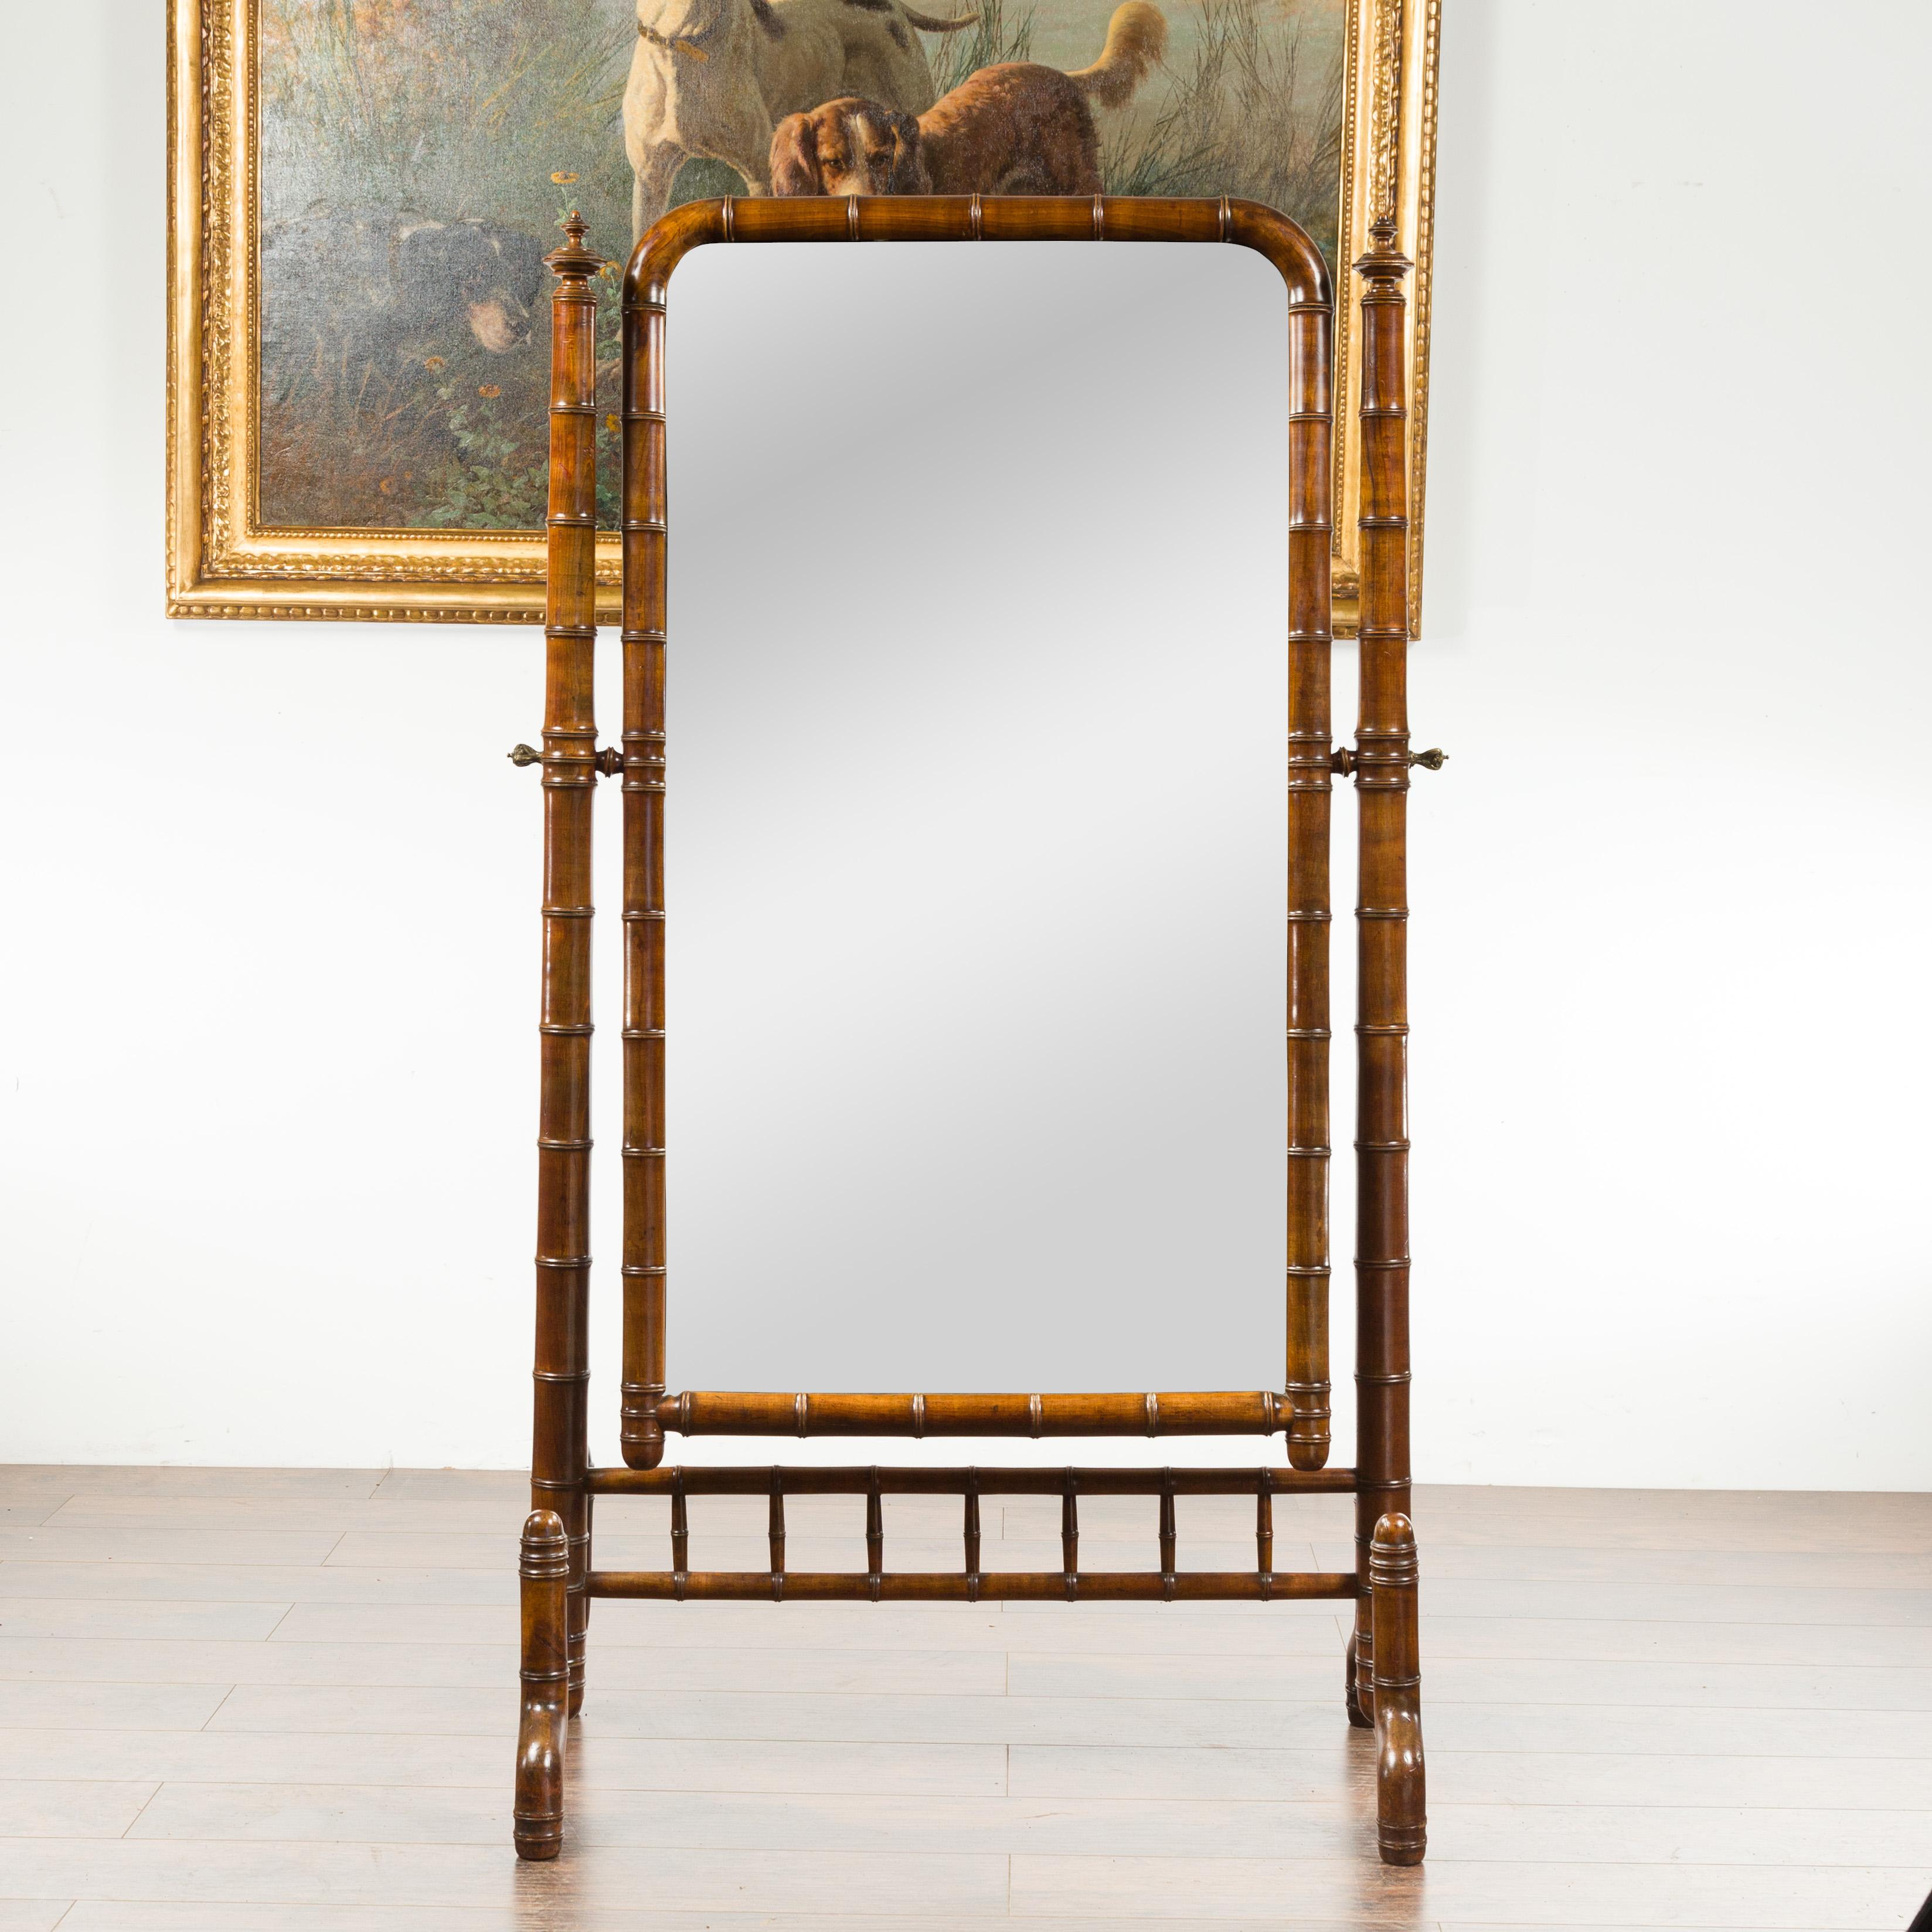 A French Napoléon III faux bamboo walnut cheval mirror from the late 19th century, with turned finials. Created in France a decade after the end of Emperor Napoléon III's reign, this walnut cheval mirror features a faux bamboo frame surrounding a